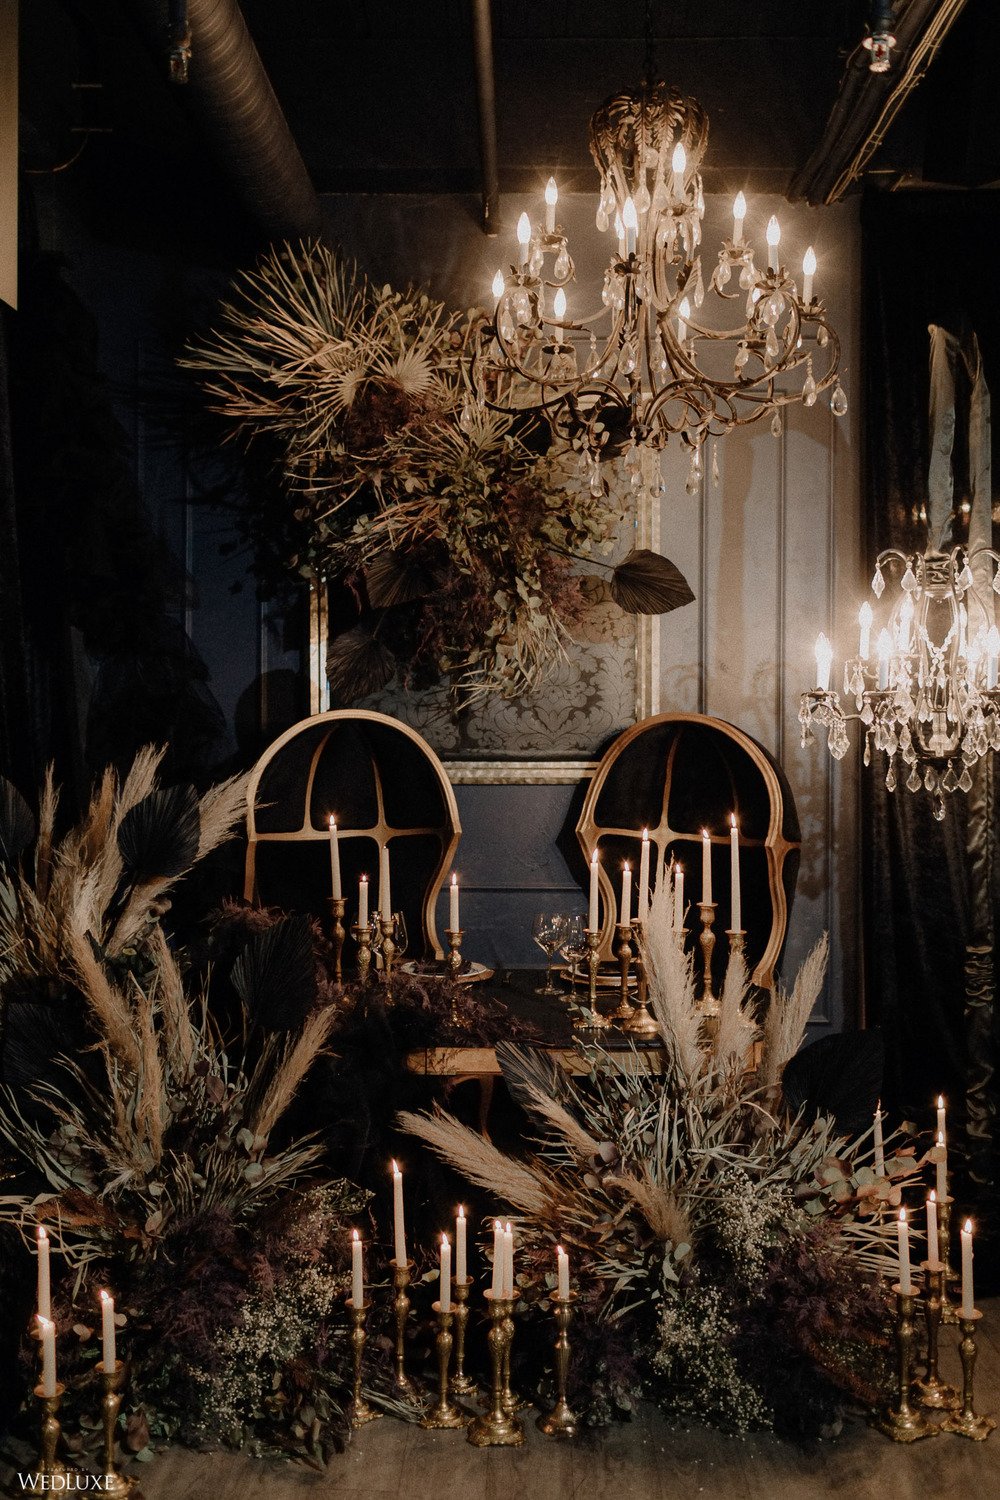 A Modern Gothic Wedding with DreamGroup Planner Chrissie Vides